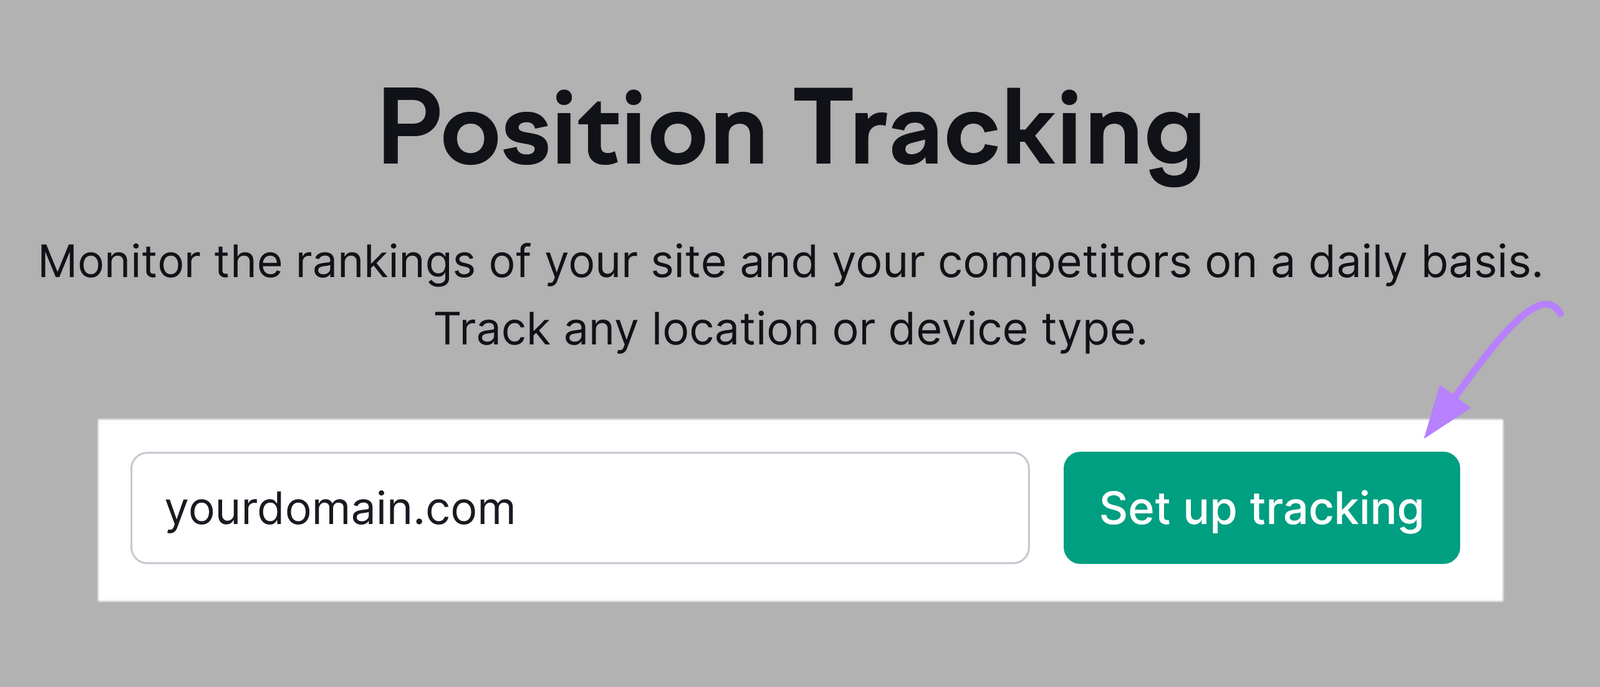 Screenshot of Position Tracking tool with “Set up tracking” button highlighted 